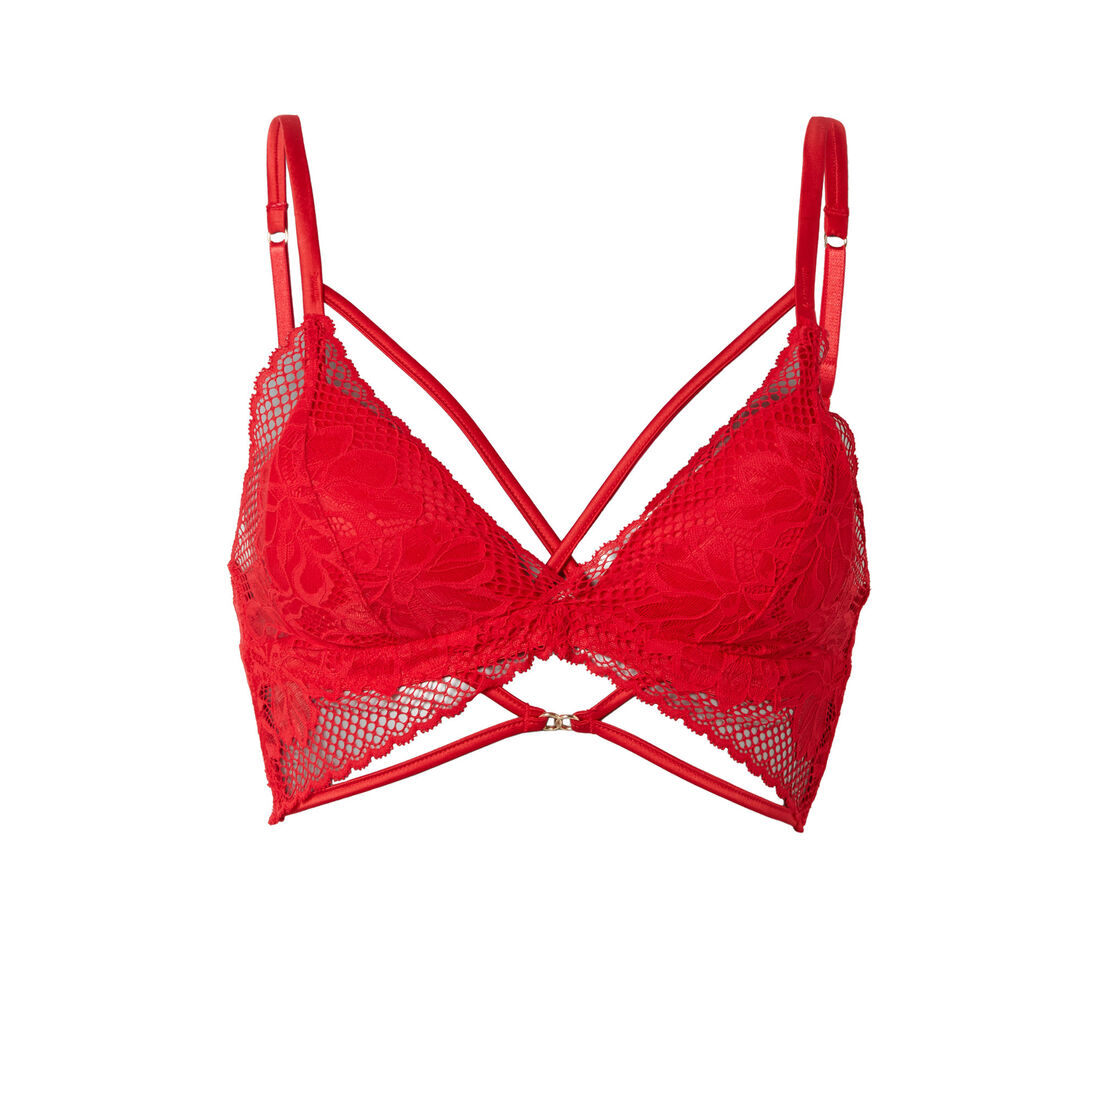 lace triangle push-up bra without underwiring with ties and ring details - red;